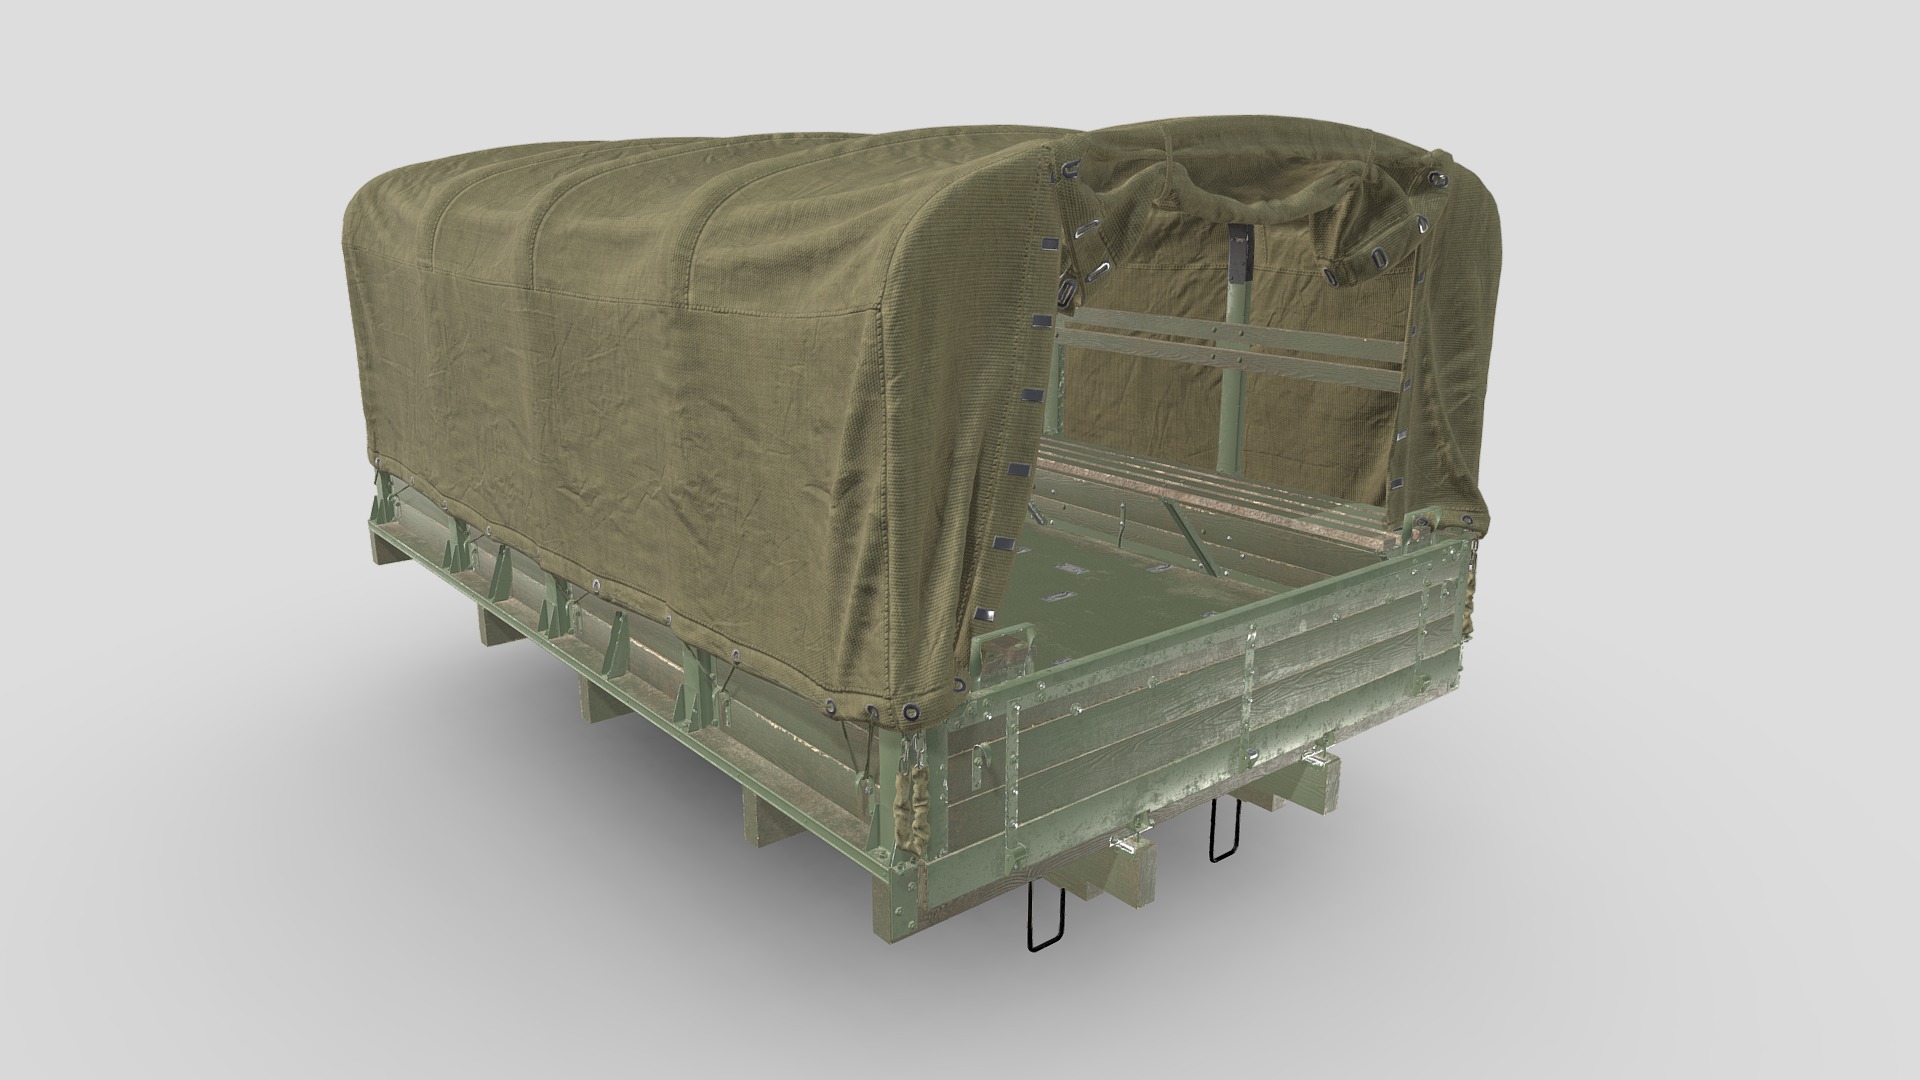 3D model ZIL- Platforma_Bort_v2-1+Tent - This is a 3D model of the ZIL- Platforma_Bort_v2-1+Tent. The 3D model is about a green rectangular object.